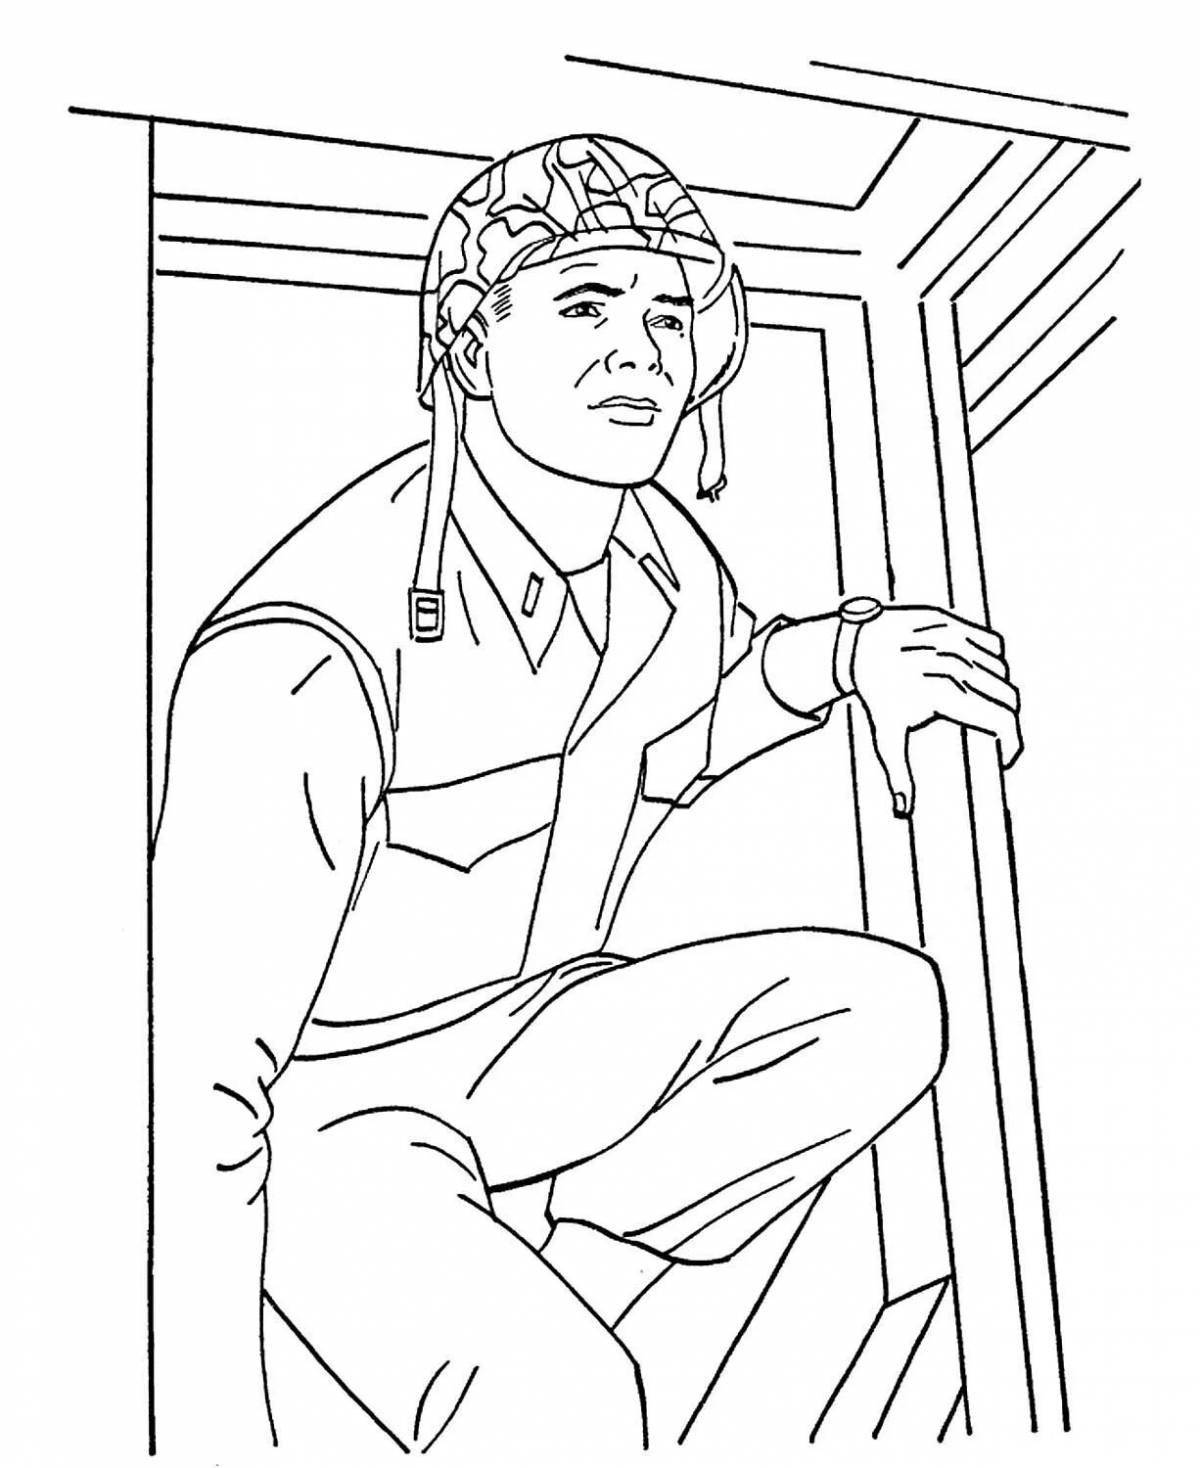 Colourful soldier hero coloring page